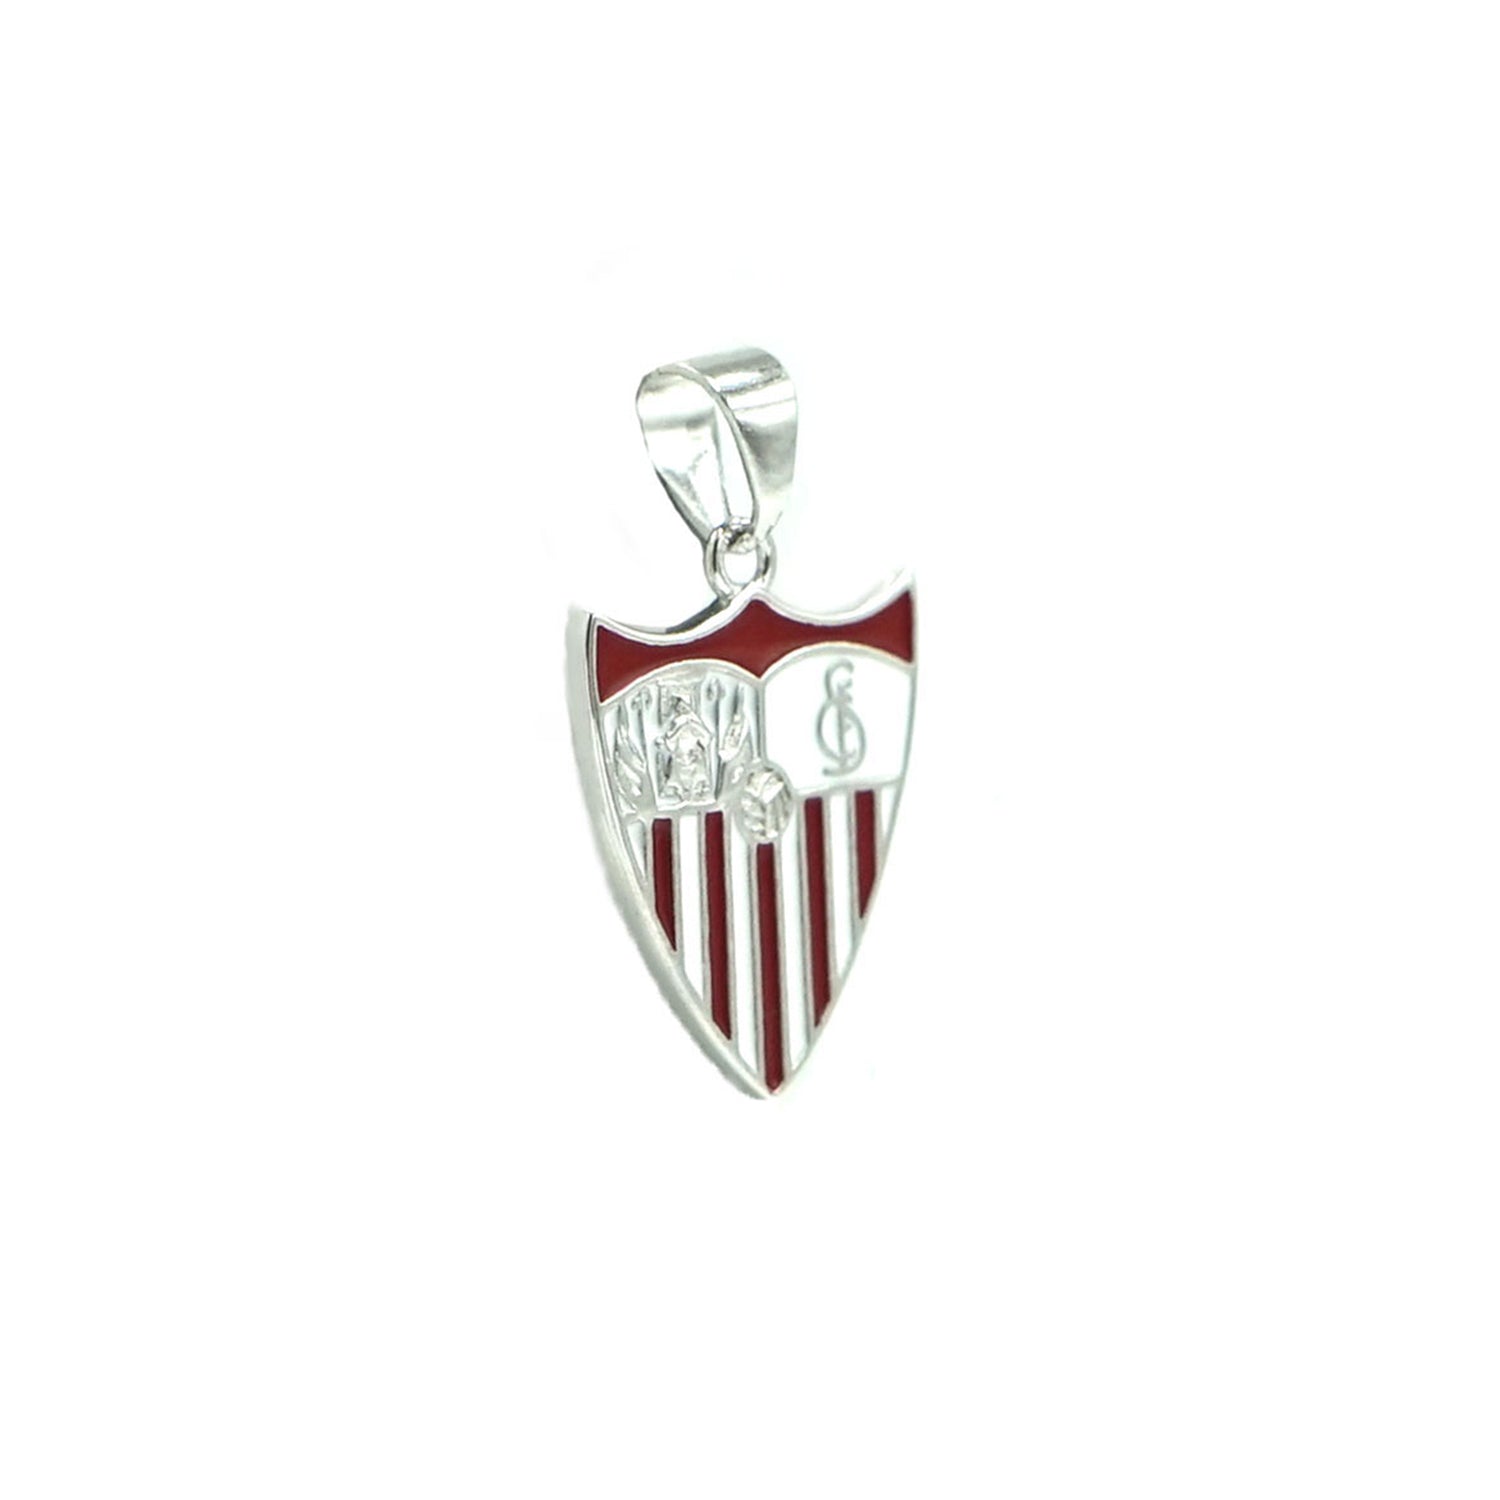 Silver pendant with enameled crest